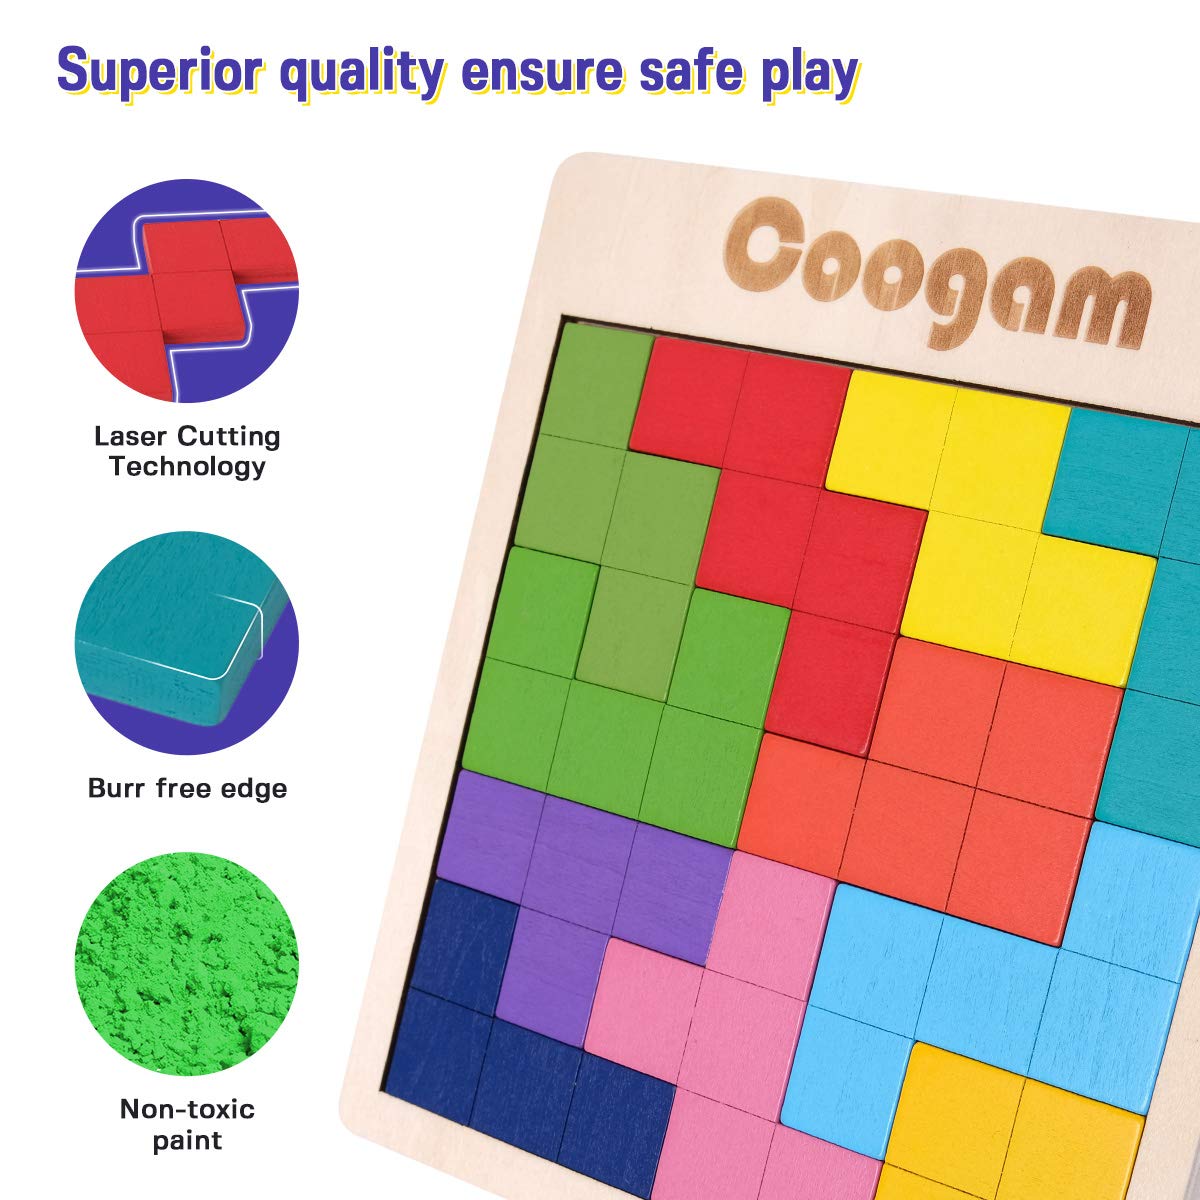 Coogam Wooden Puzzle Pattern Blocks Brain Teasers Game with 60 Challenges, 3D Russian Building Toy Wood Tangram Shape Jigsaw Puzzles Montessori STEM Educational Toys Gift for Kids Adults